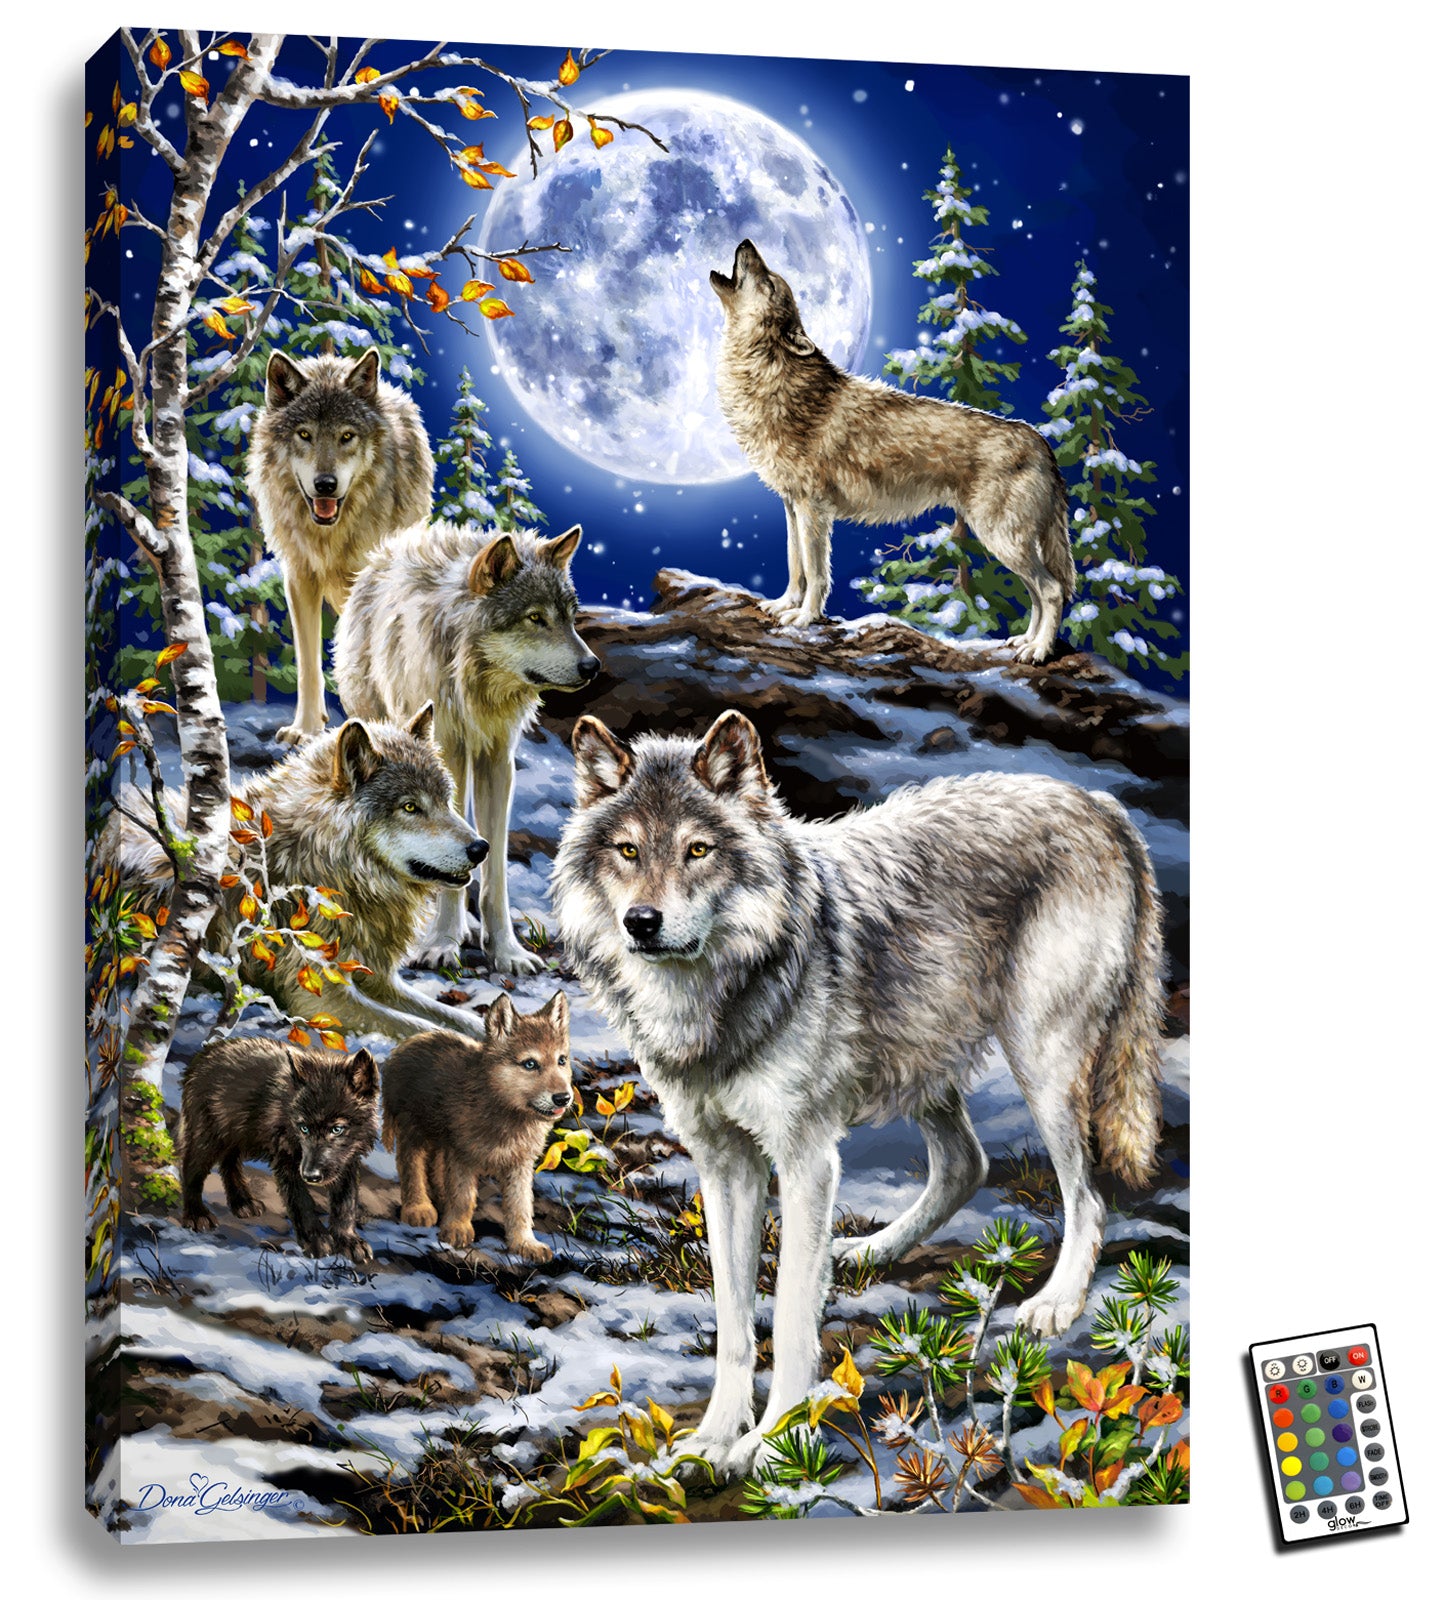 As you gaze upon the majestic image of a pack of wolves standing in a snow-covered landscape, you'll feel the power and magic of their bond.  The pack includes two playful pups who are clearly adored by their elders, and one wolf stands atop a rock, howling at the large full moon in the background.